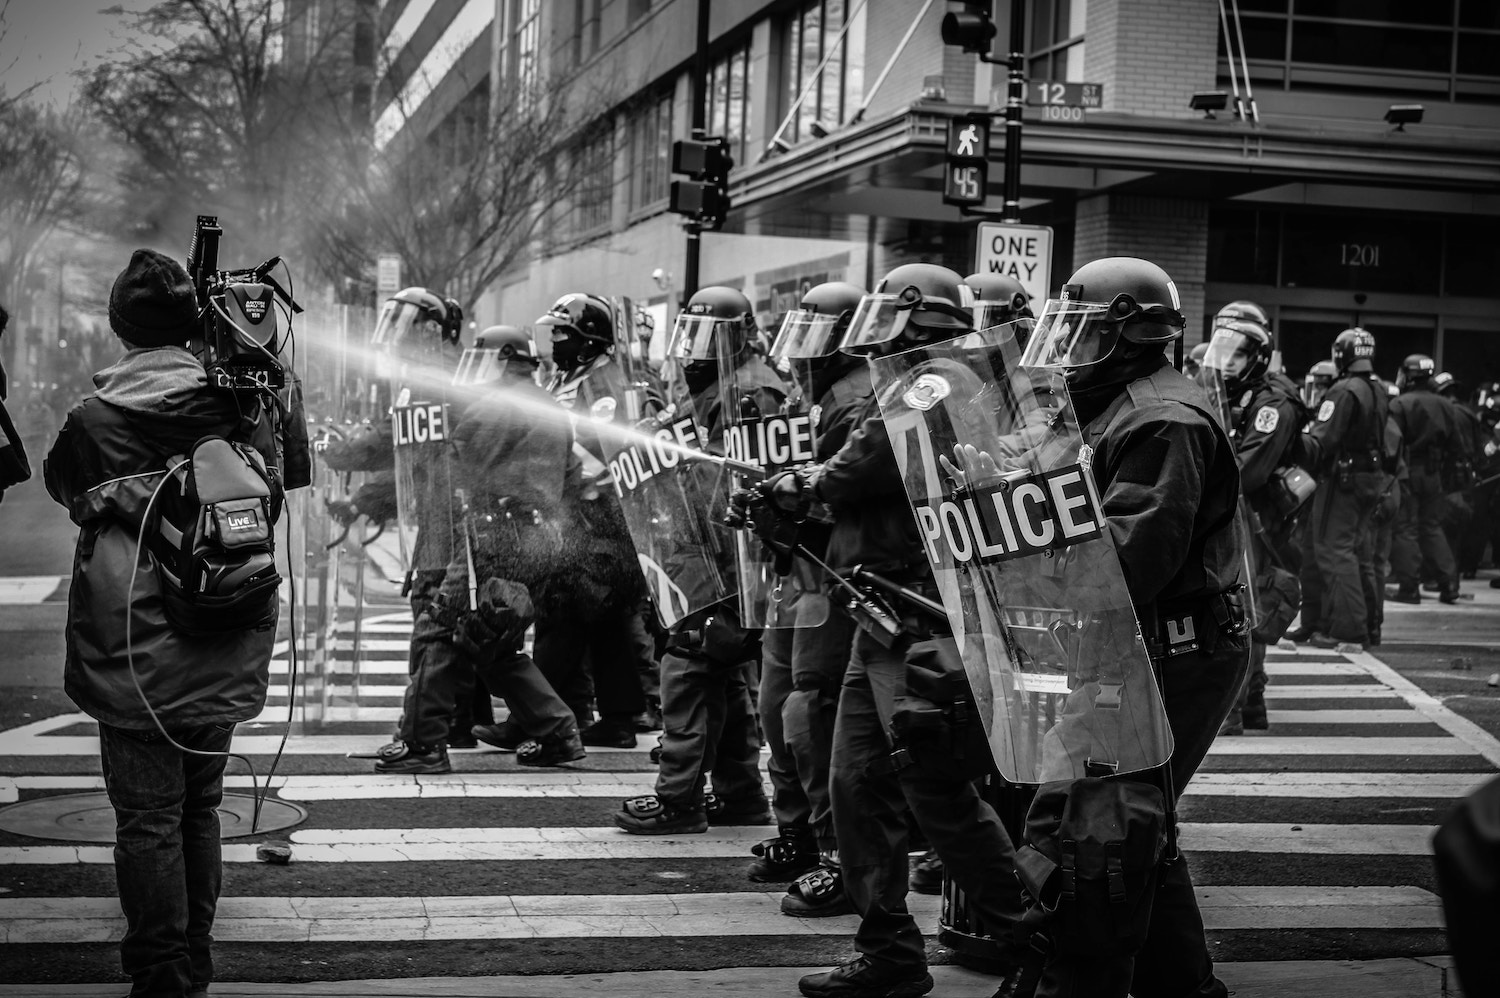 police marching in riot gear spray protestors with tear gas - for just world hypothesis article